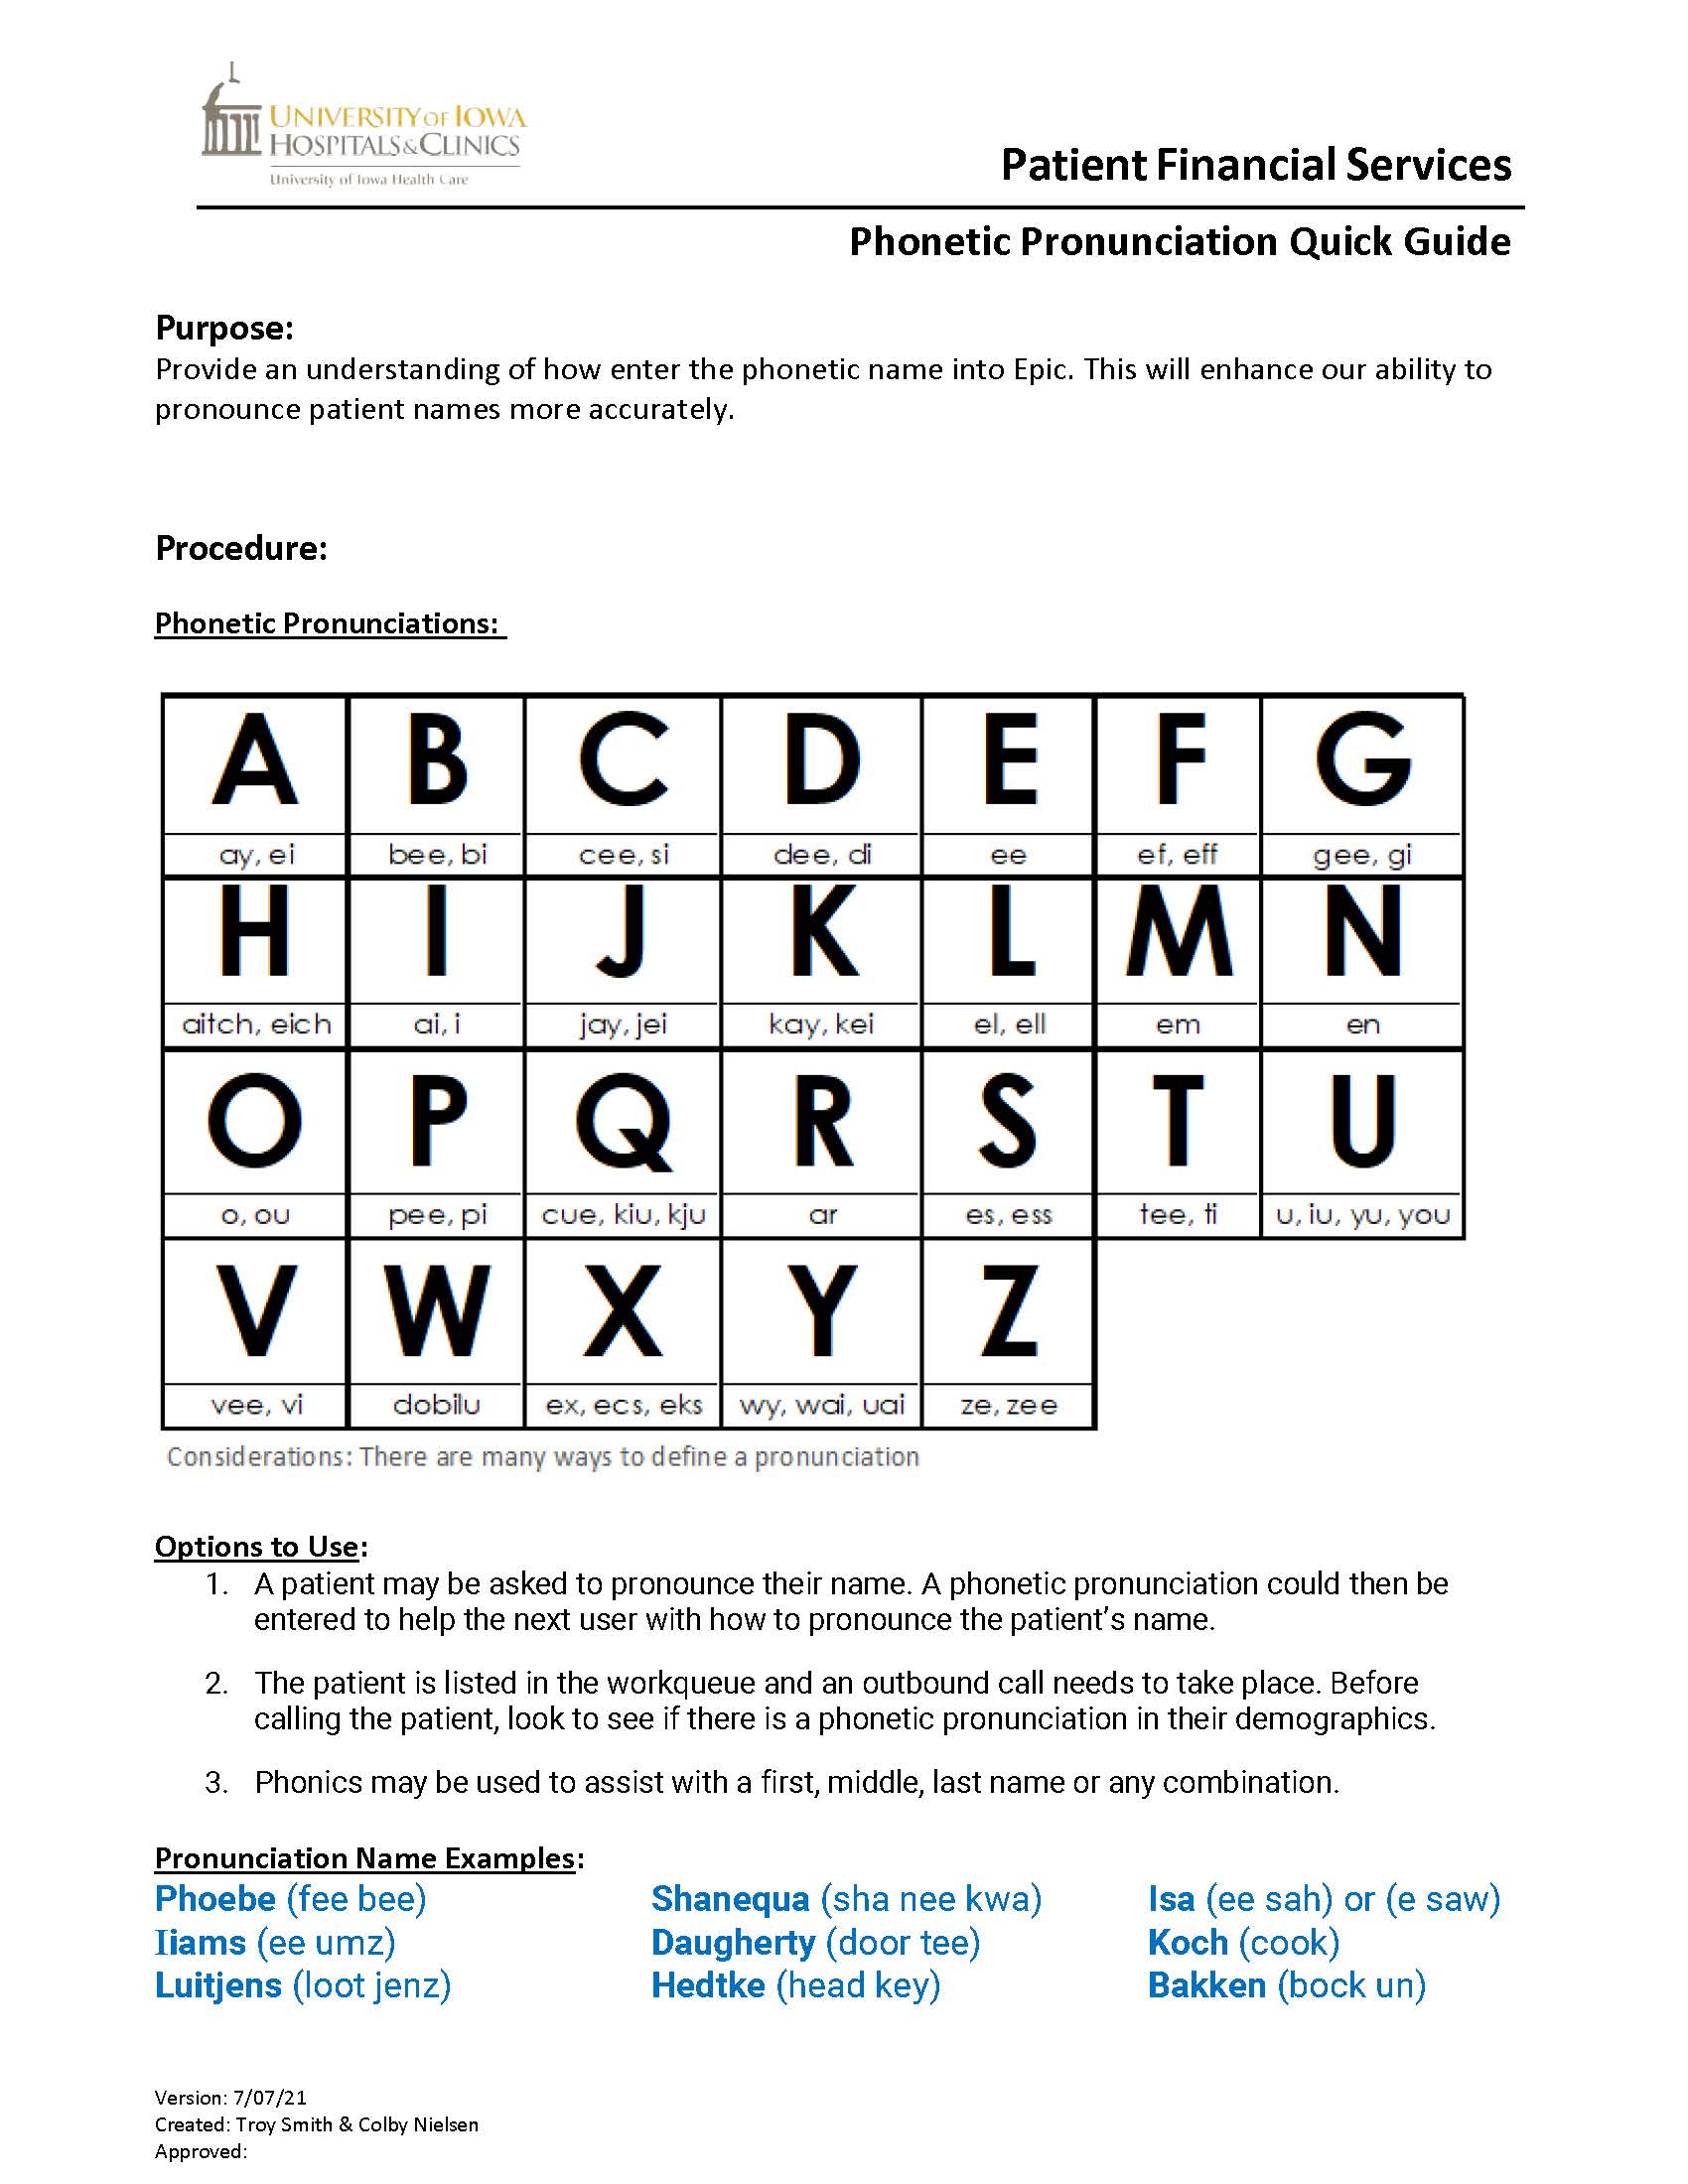 Phonetic Pronunciation Quick Guide: How to enter a phonetic name into